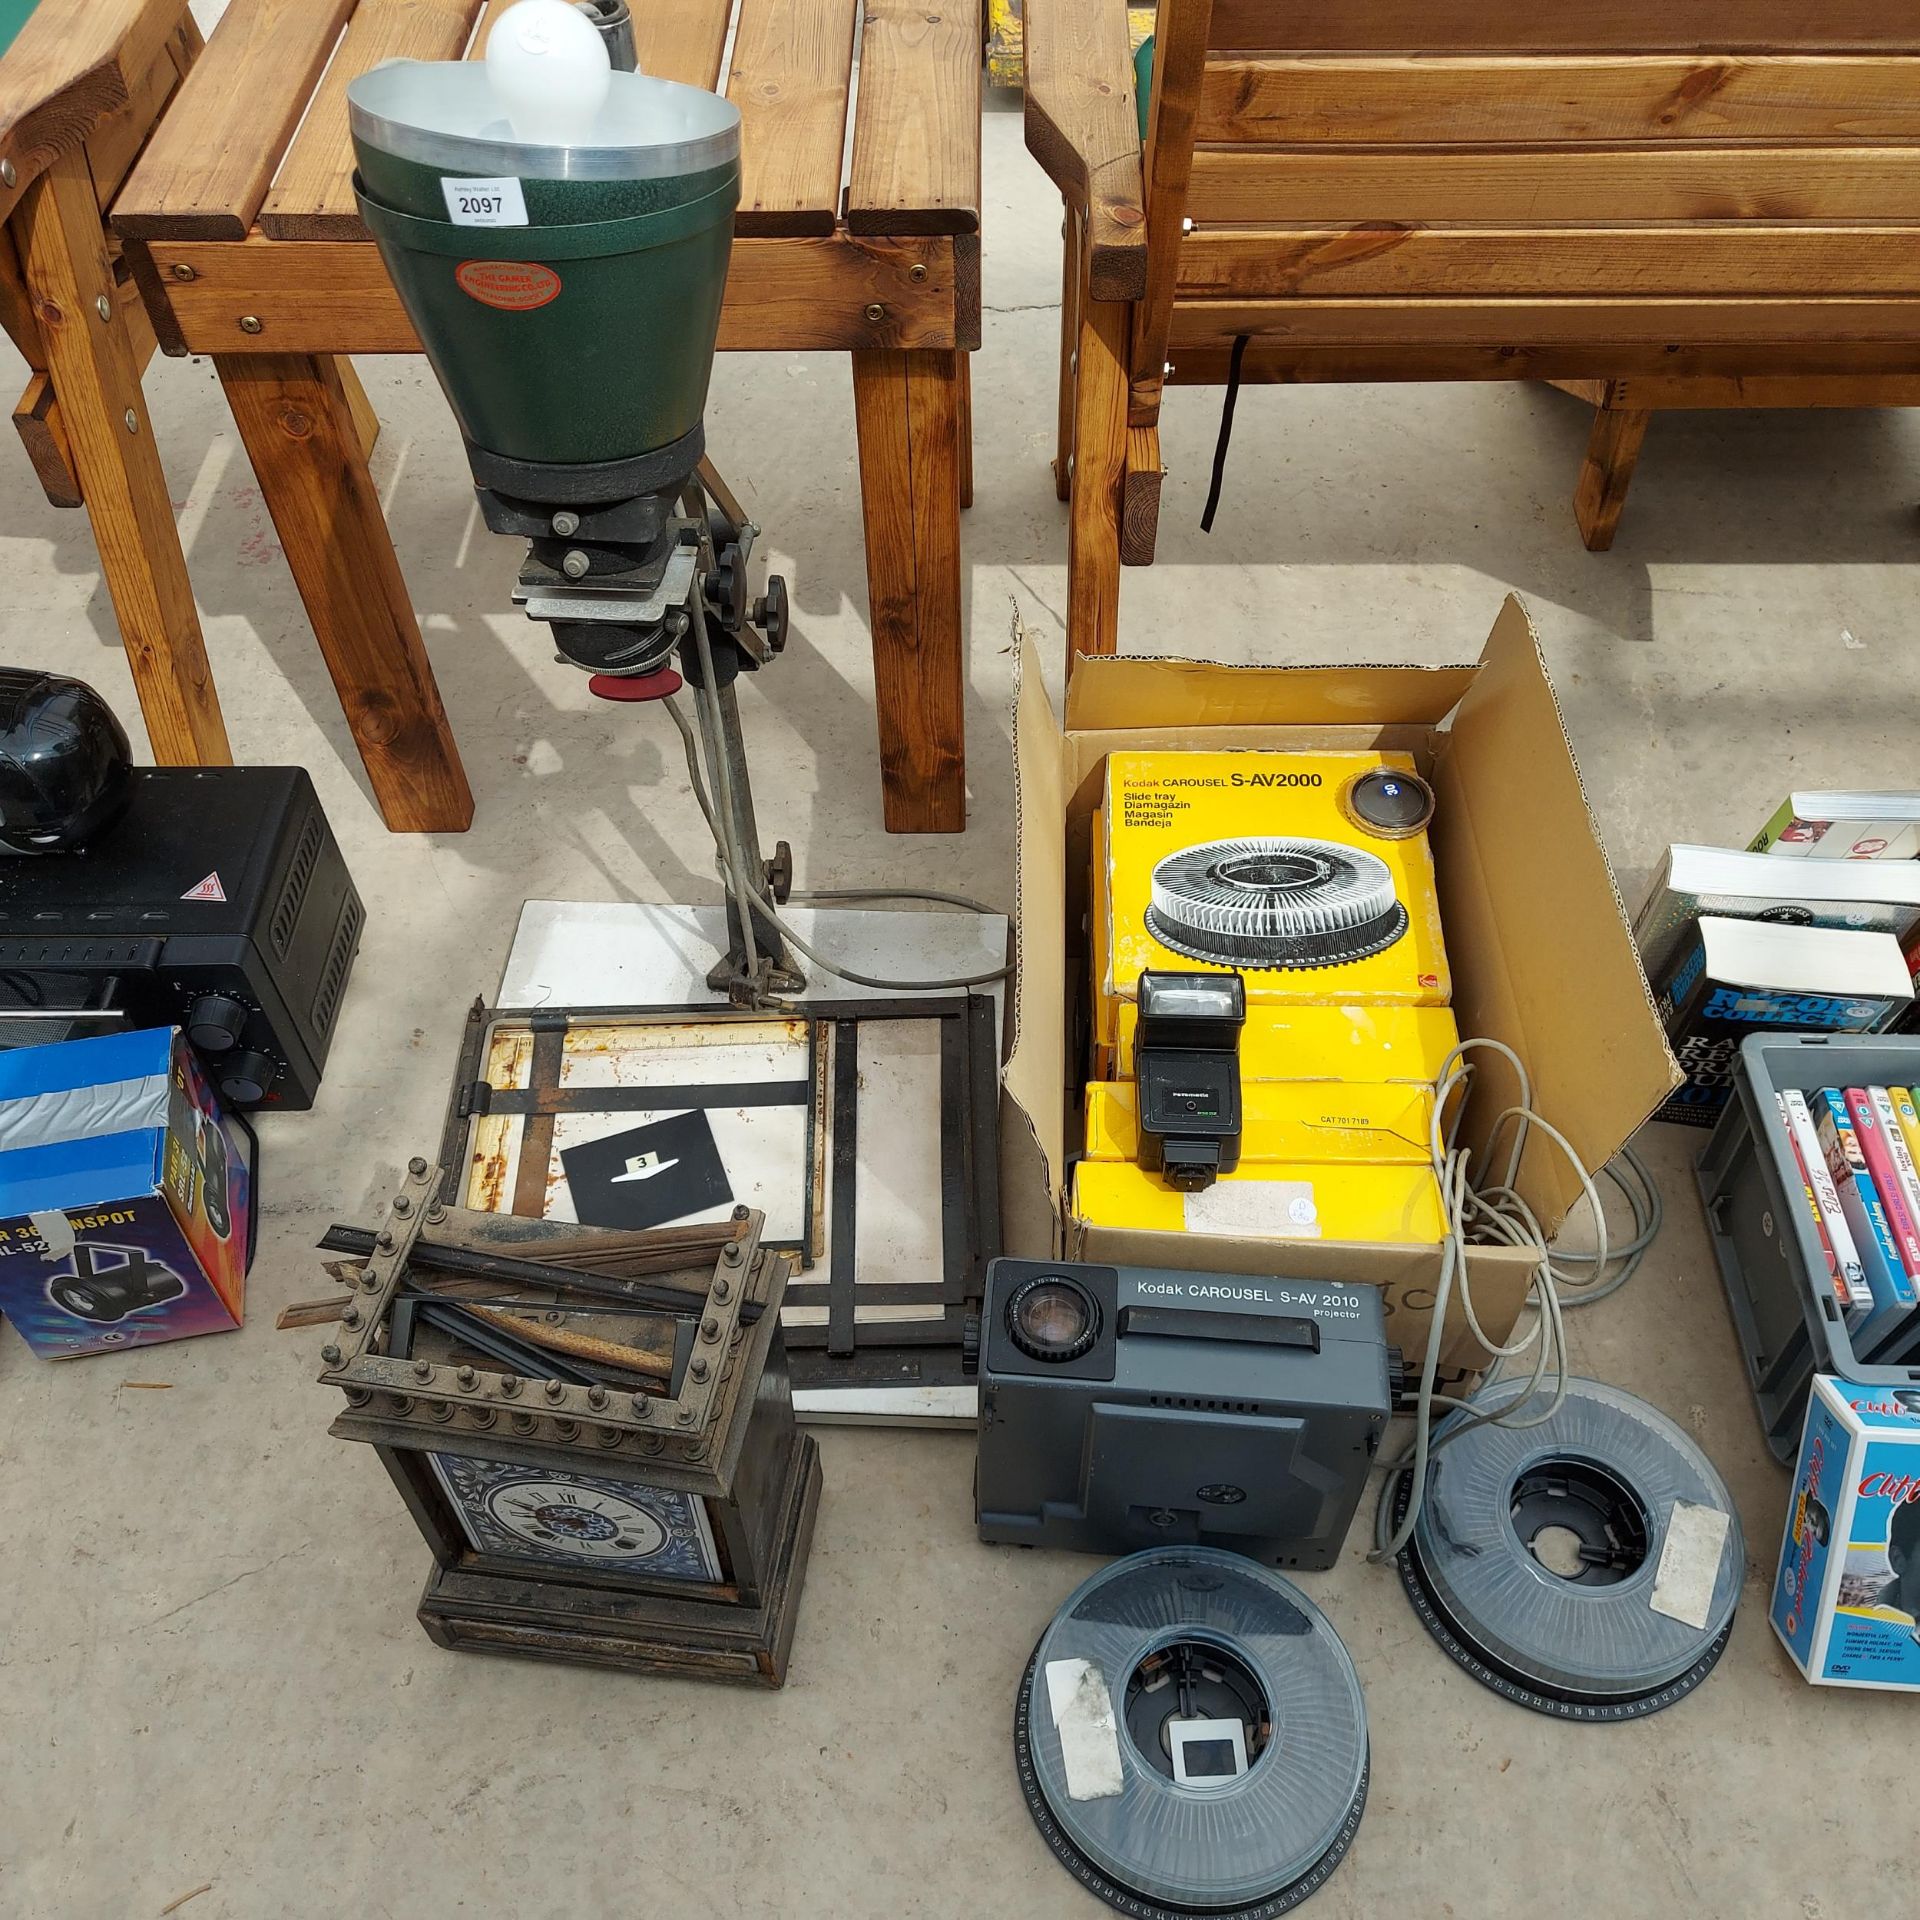 AN ASSORTMENT OF PHOTOGRAPHY EQUIPMENT TO INCLUDE A LAMP AND A KODAK CAROUSEL ETC